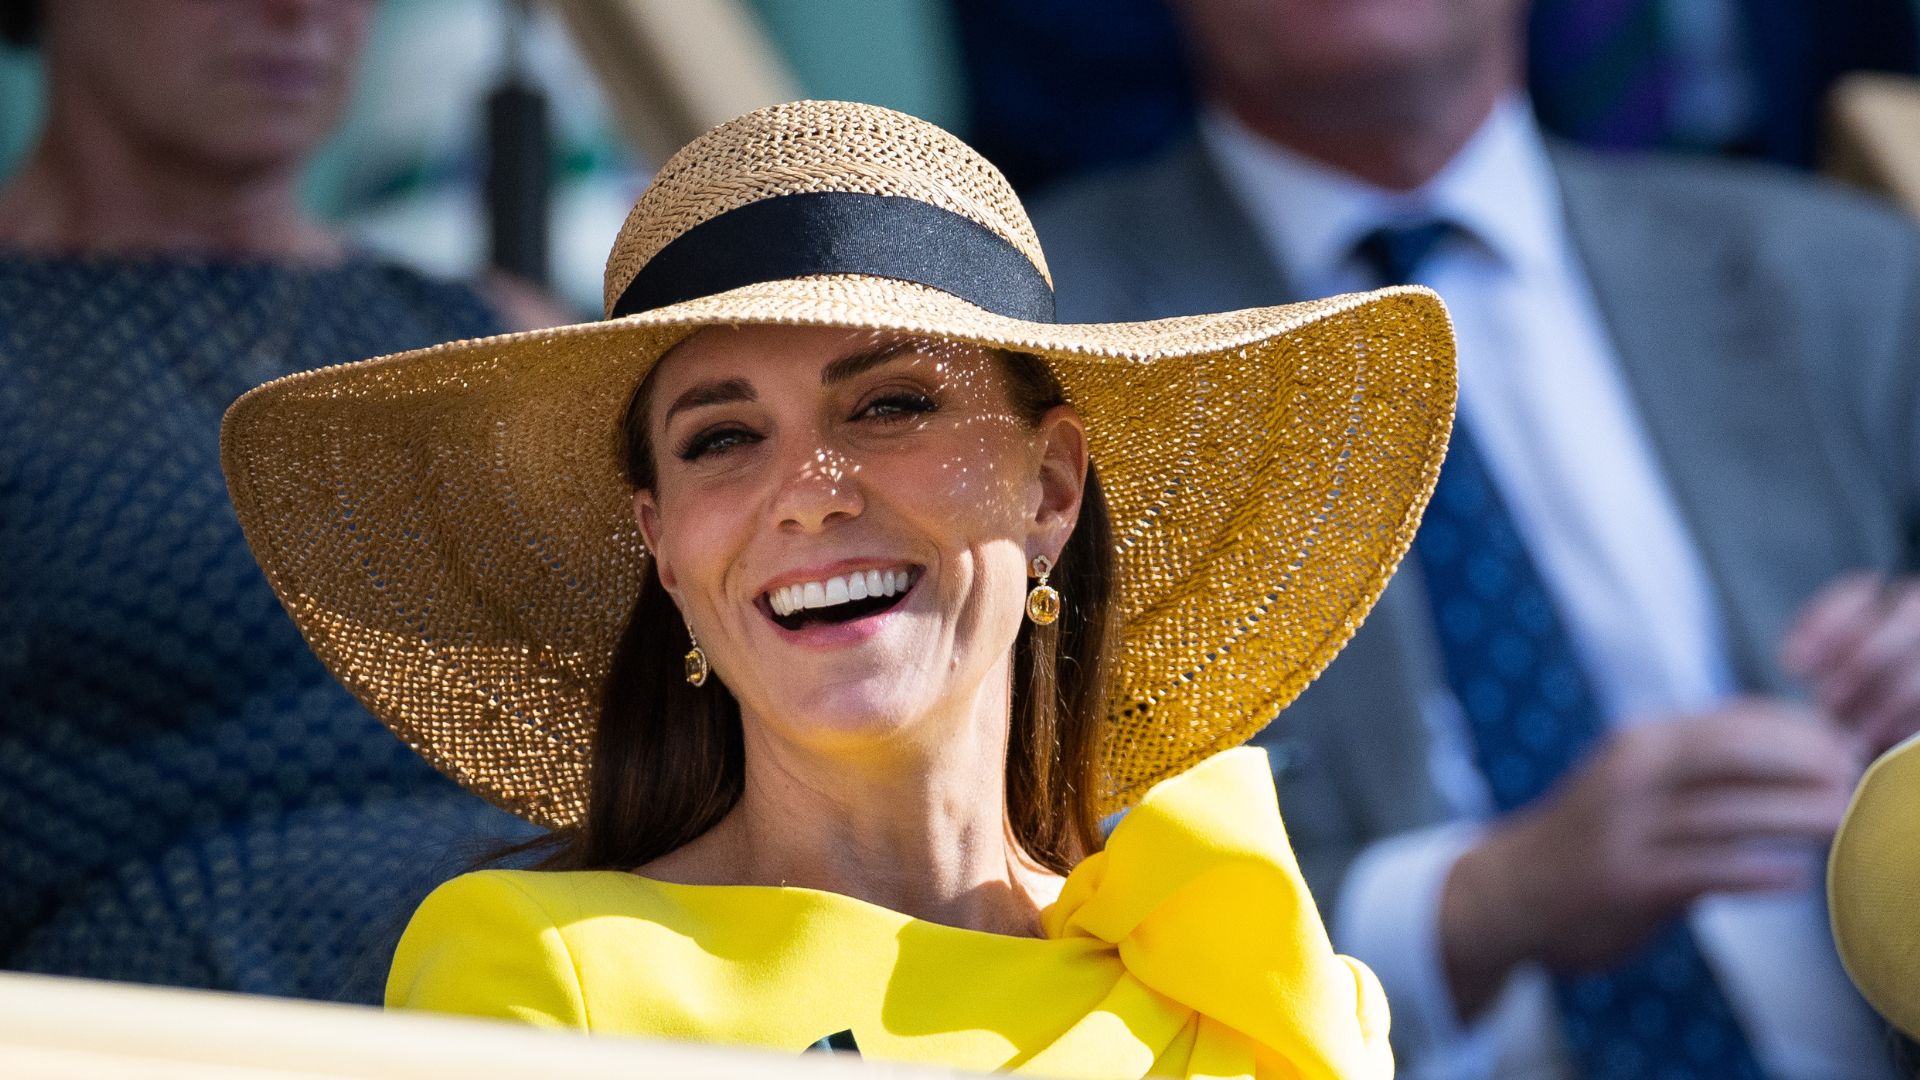 Kate Middleton once teamed a cowboy hat with a chic…